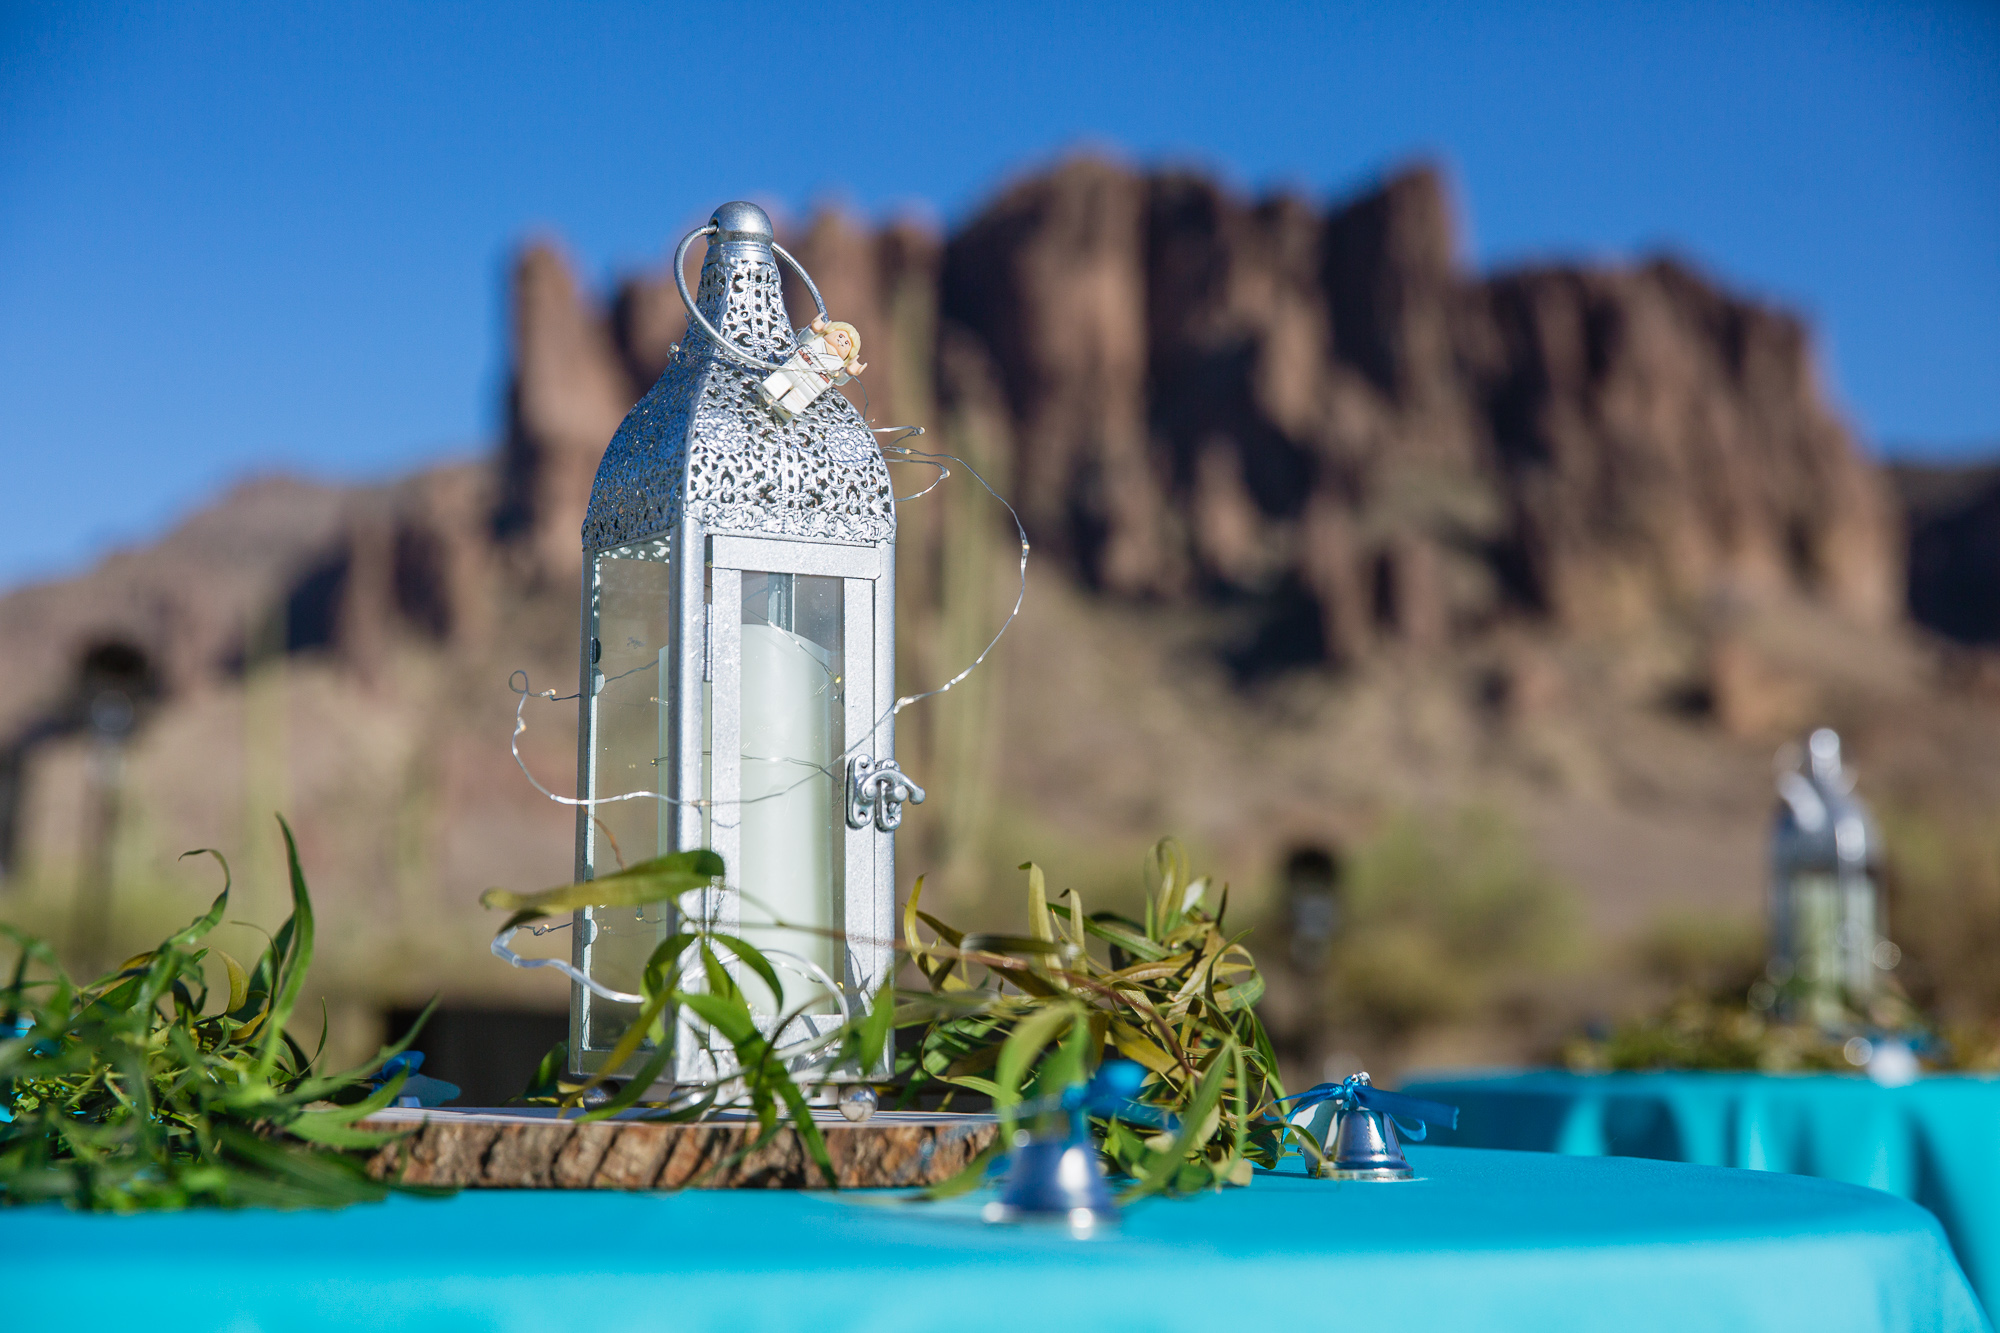 Simple wedding lantern and Star Wars lego centerpiece with Irish bell favors at a Lost Dutchman State Park wedding by Arizona wedding photographer PMA Photography.